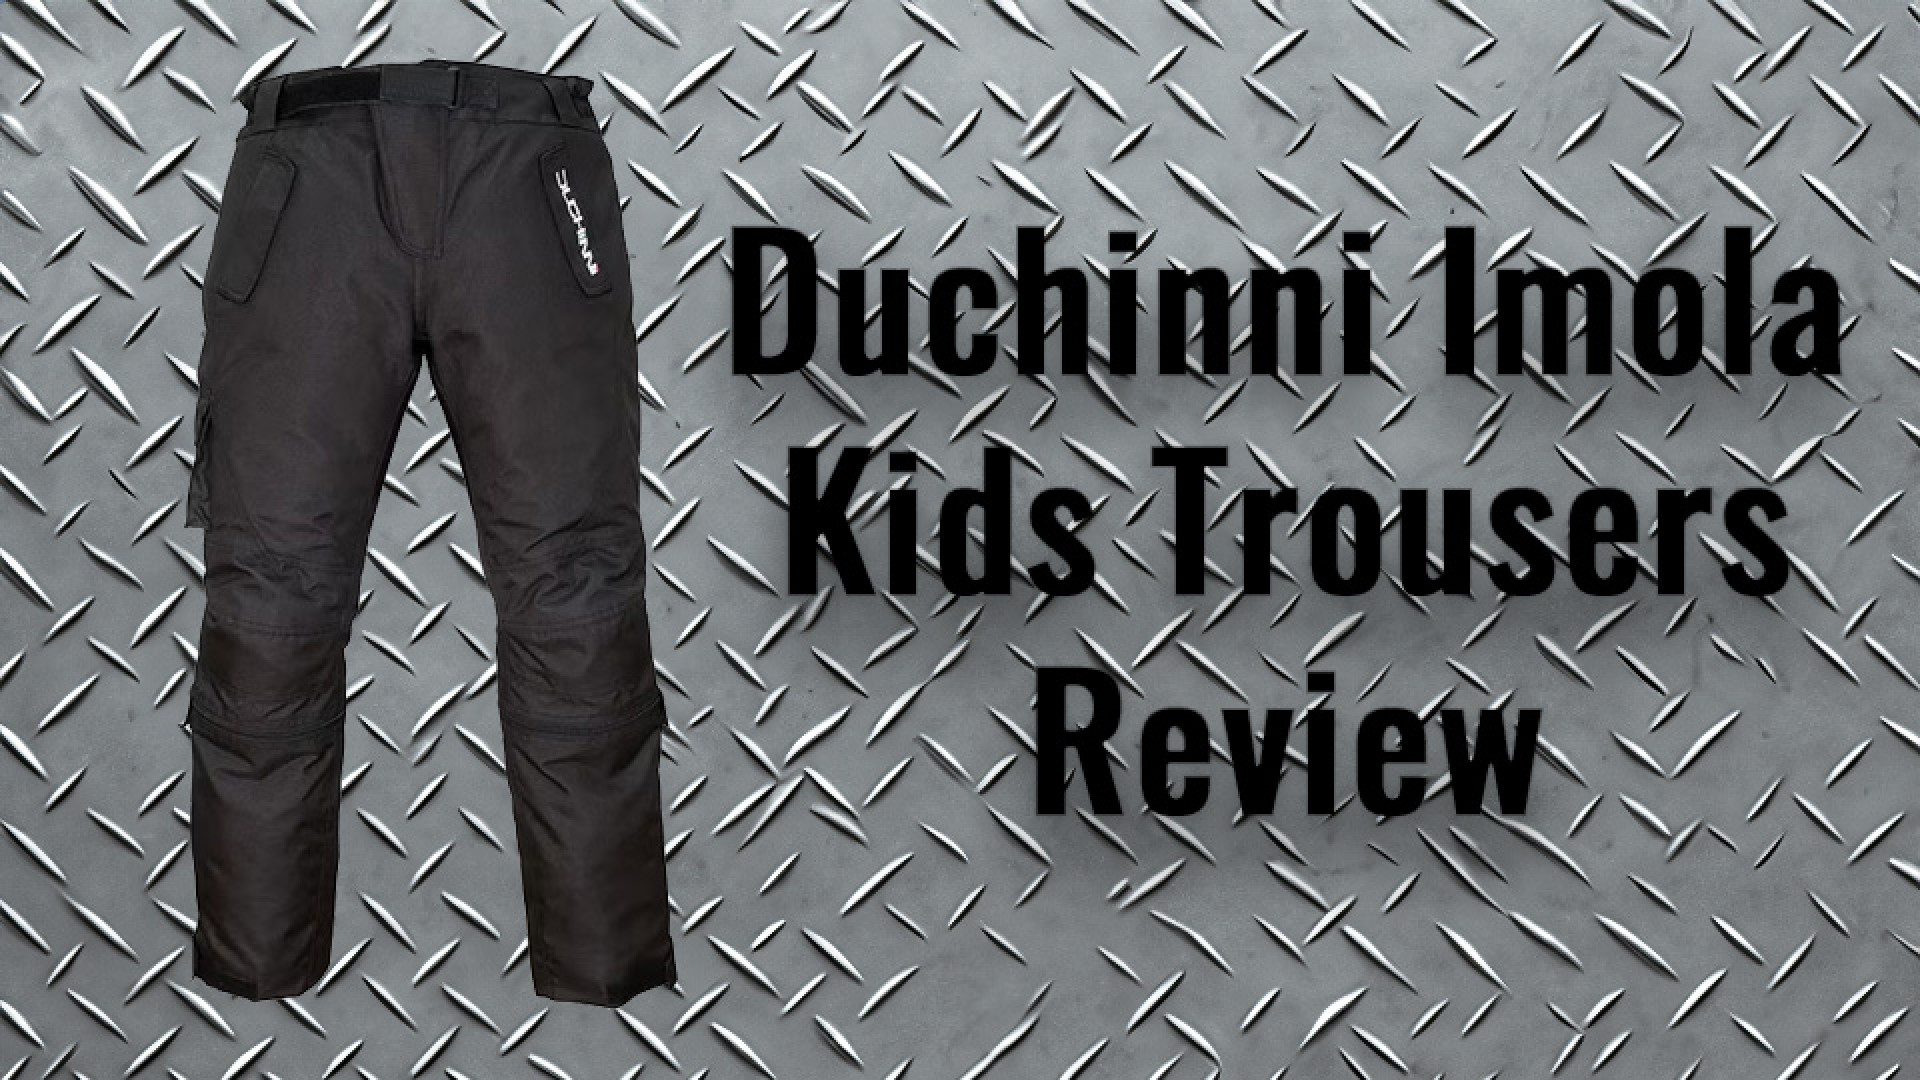 https://www.raceleathers.co.uk/image/cache/catalog/Blog%20Images/Duchinni%20Imola%20Kids%20Trousers%20Review-1920x1080.jpg